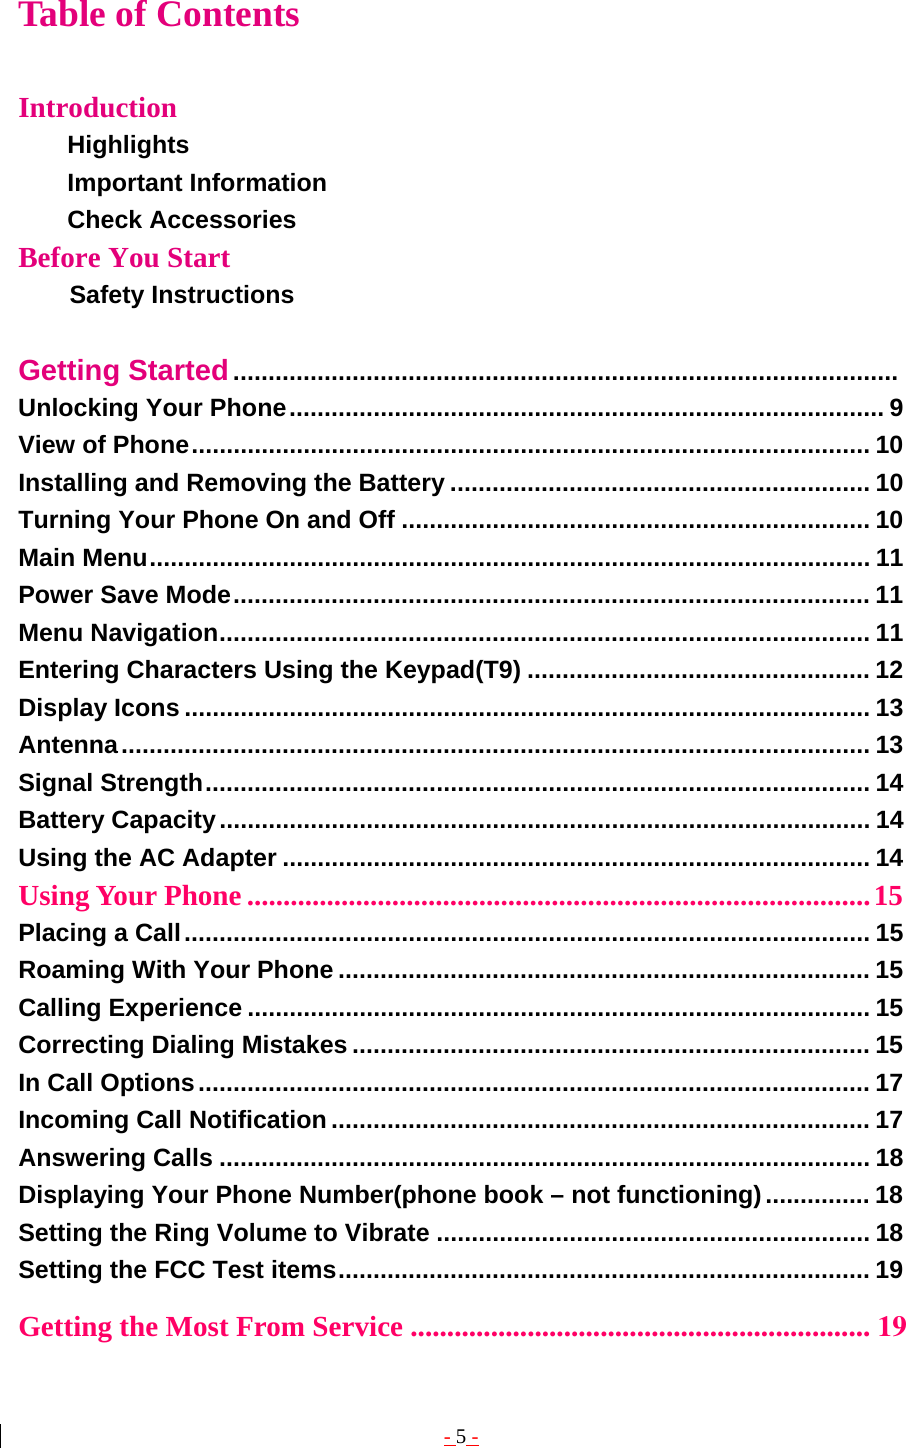 - 5 - Table of Contents  Introduction Highlights         Important Information        Check Accessories  Before You Start           Safety Instructions  Getting Started...............................................................................................  Unlocking Your Phone..................................................................................... 9 View of Phone................................................................................................. 10 Installing and Removing the Battery ............................................................ 10 Turning Your Phone On and Off ................................................................... 10 Main Menu....................................................................................................... 11 Power Save Mode........................................................................................... 11 Menu Navigation............................................................................................. 11 Entering Characters Using the Keypad(T9) ................................................. 12 Display Icons .................................................................................................. 13 Antenna........................................................................................................... 13 Signal Strength............................................................................................... 14 Battery Capacity............................................................................................. 14 Using the AC Adapter .................................................................................... 14 Using Your Phone ......................................................................................15 Placing a Call.................................................................................................. 15 Roaming With Your Phone ............................................................................ 15 Calling Experience ......................................................................................... 15 Correcting Dialing Mistakes .......................................................................... 15 In Call Options................................................................................................ 17 Incoming Call Notification ............................................................................. 17 Answering Calls ............................................................................................. 18 Displaying Your Phone Number(phone book – not functioning)............... 18 Setting the Ring Volume to Vibrate .............................................................. 18 Setting the FCC Test items............................................................................ 19 Getting the Most From Service ............................................................... 19